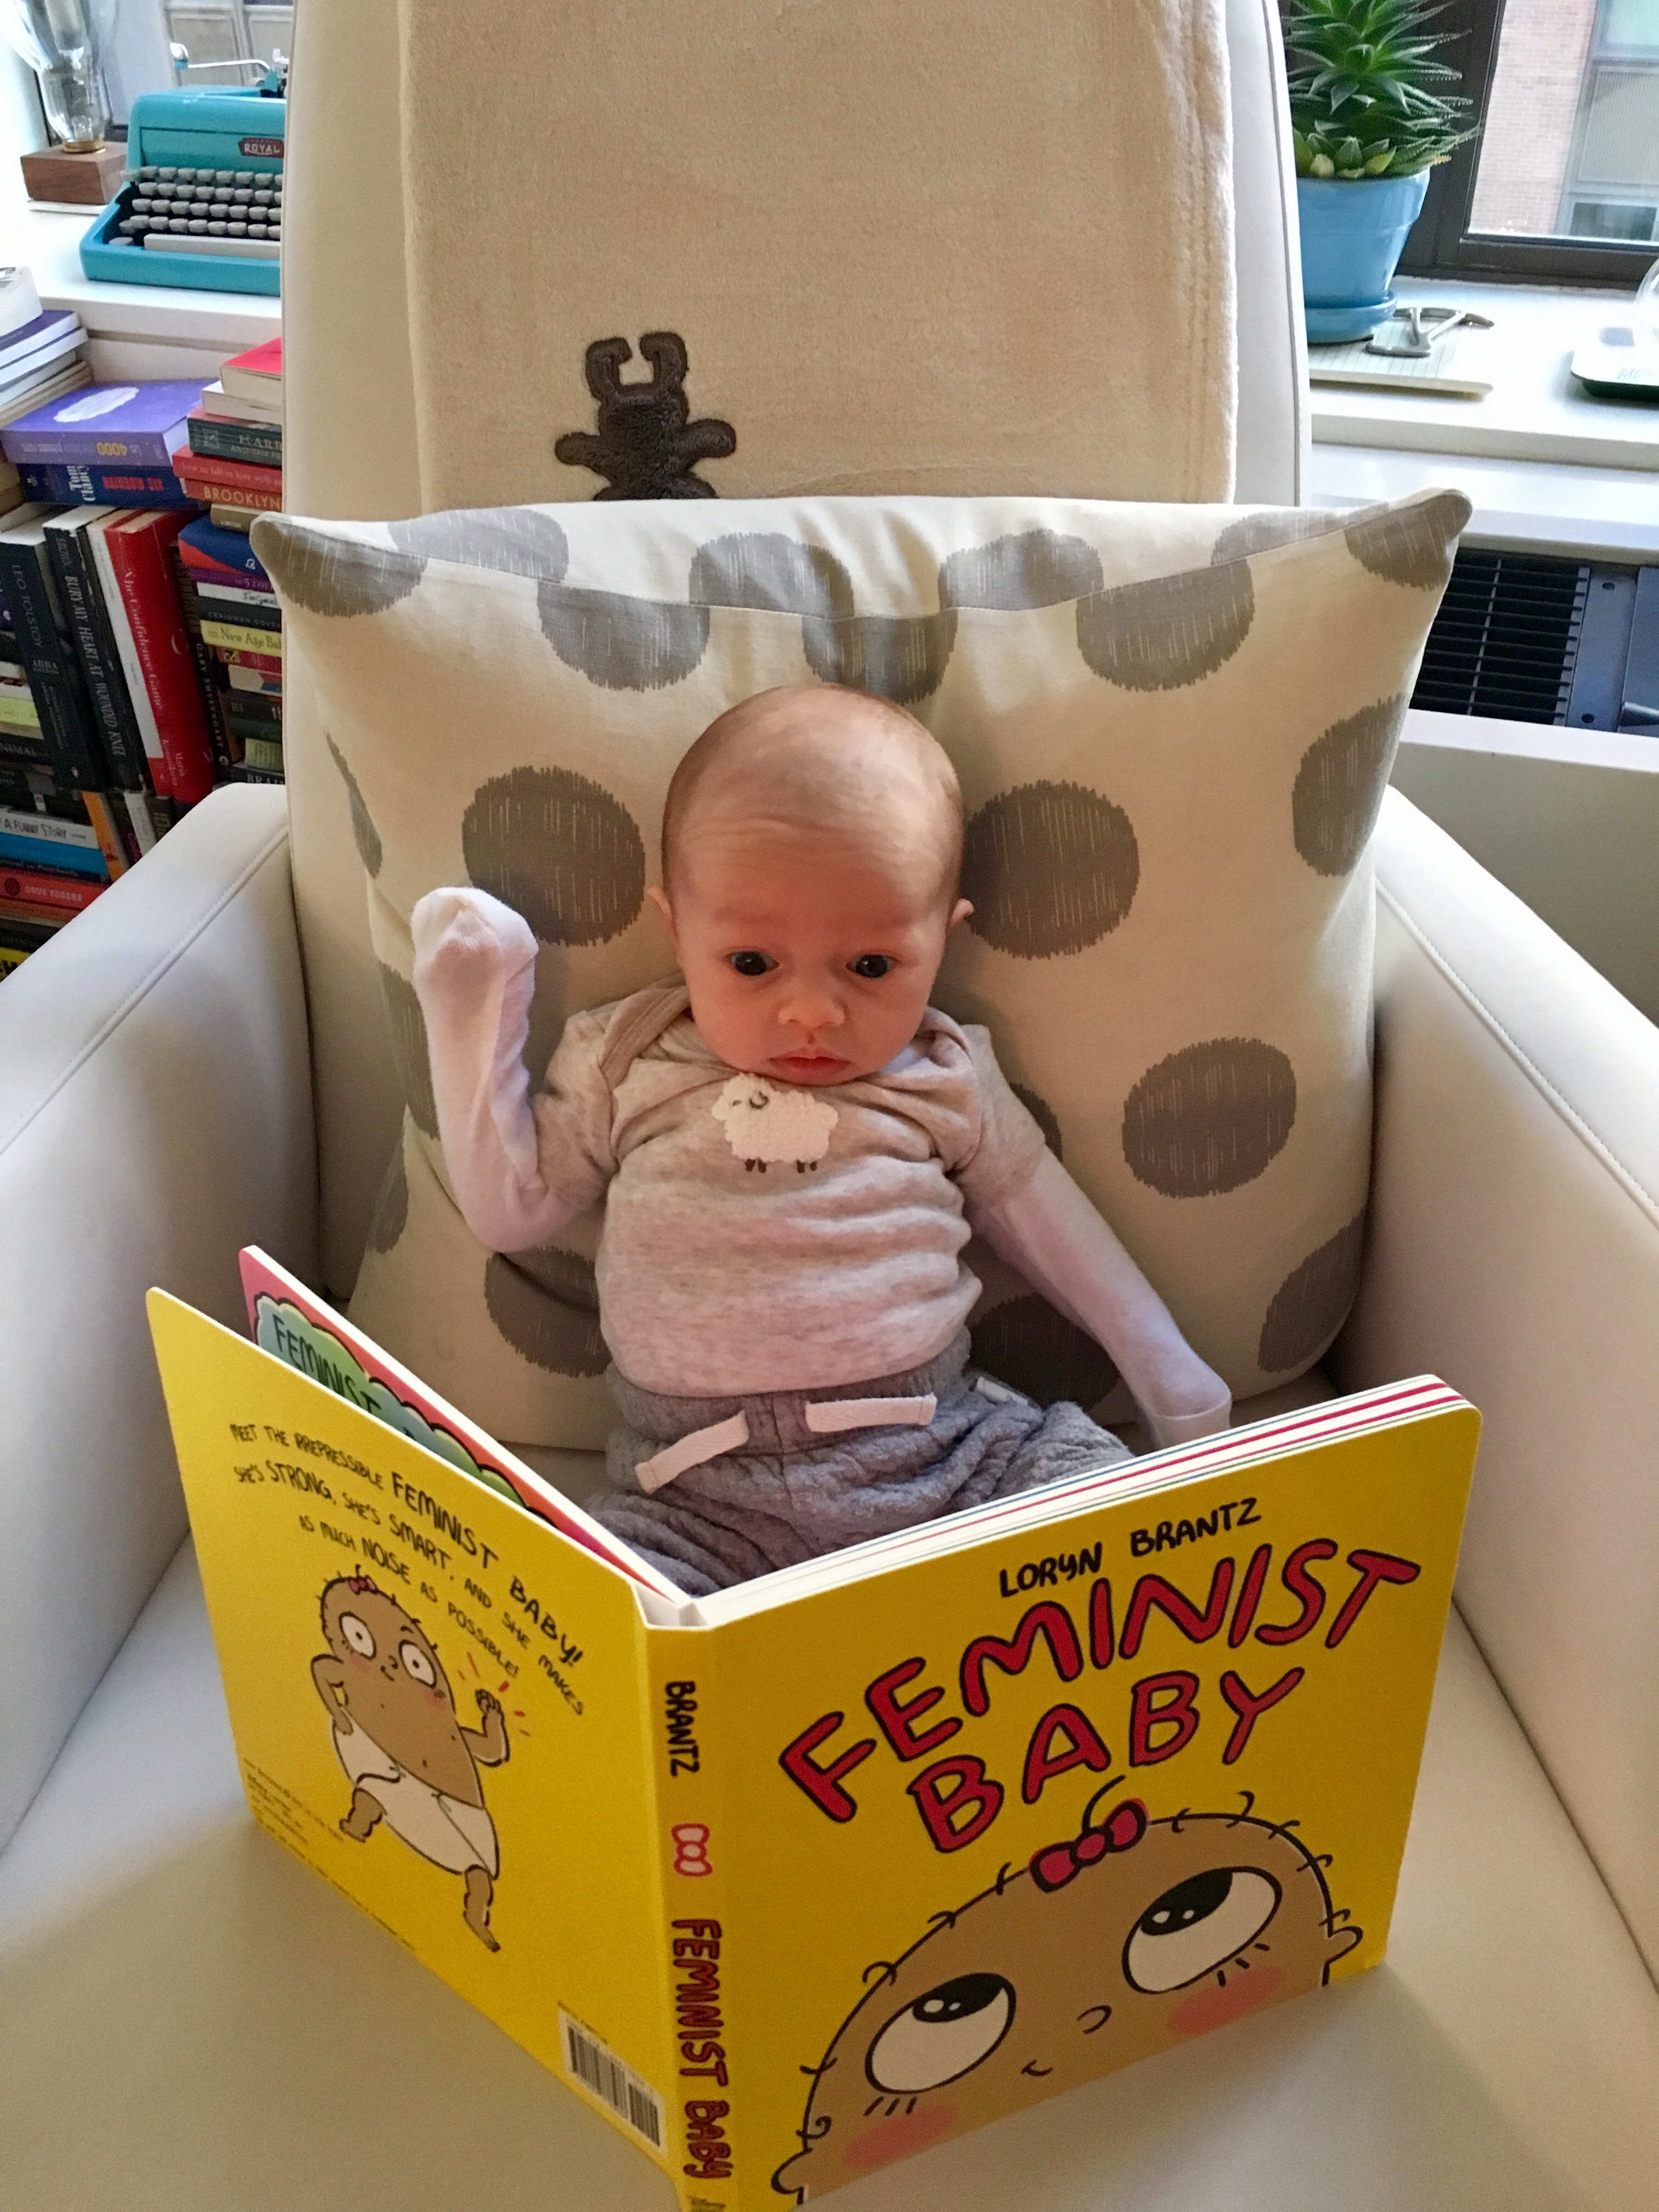 best baby books to read